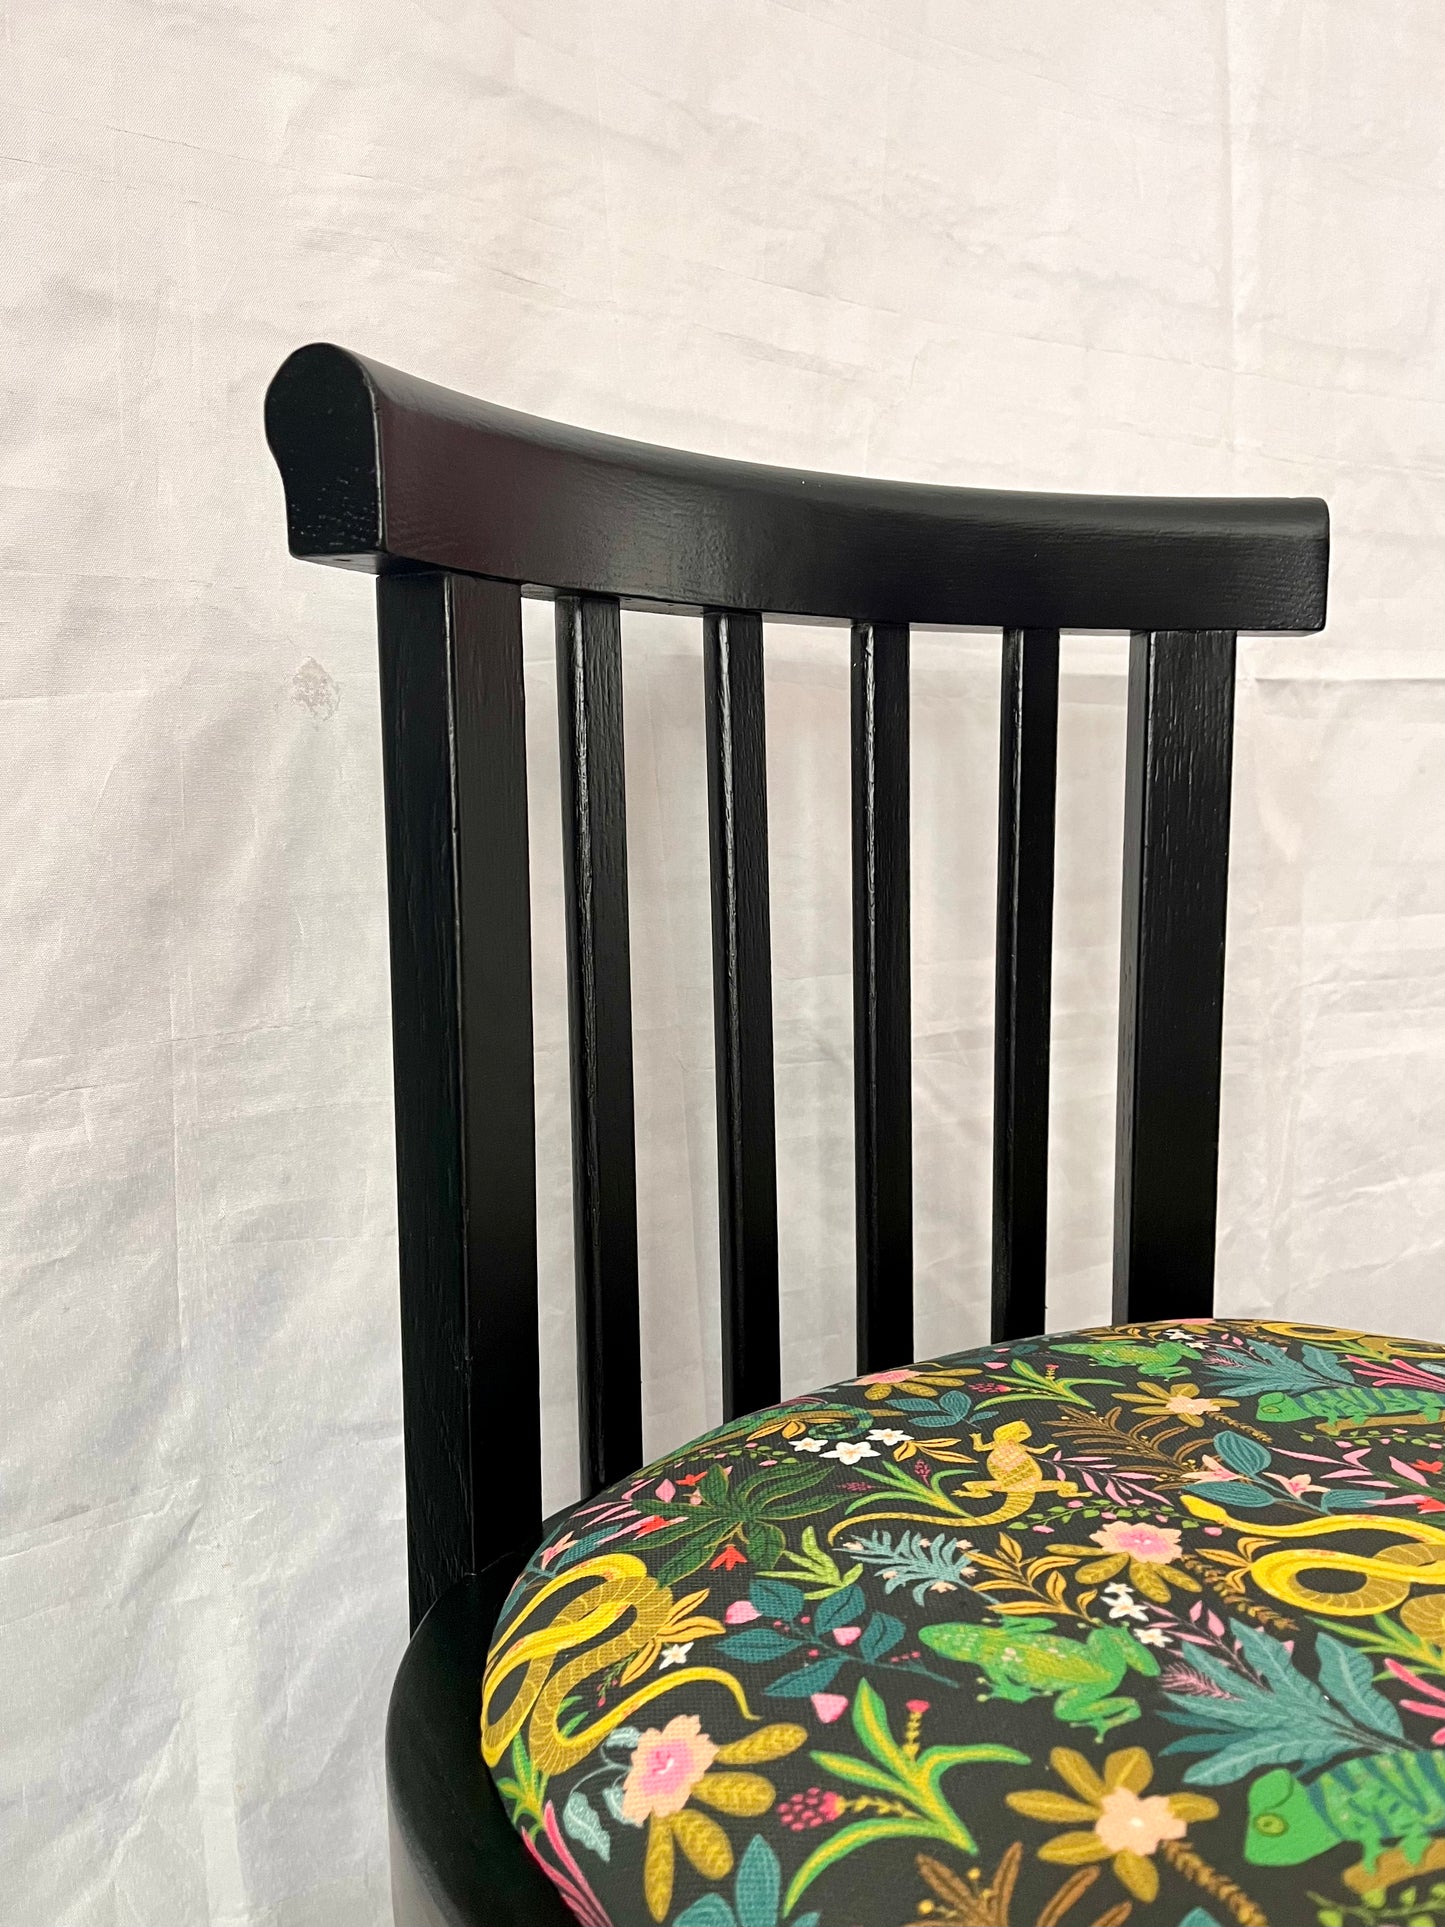 Jungle Wood Dining Chairs